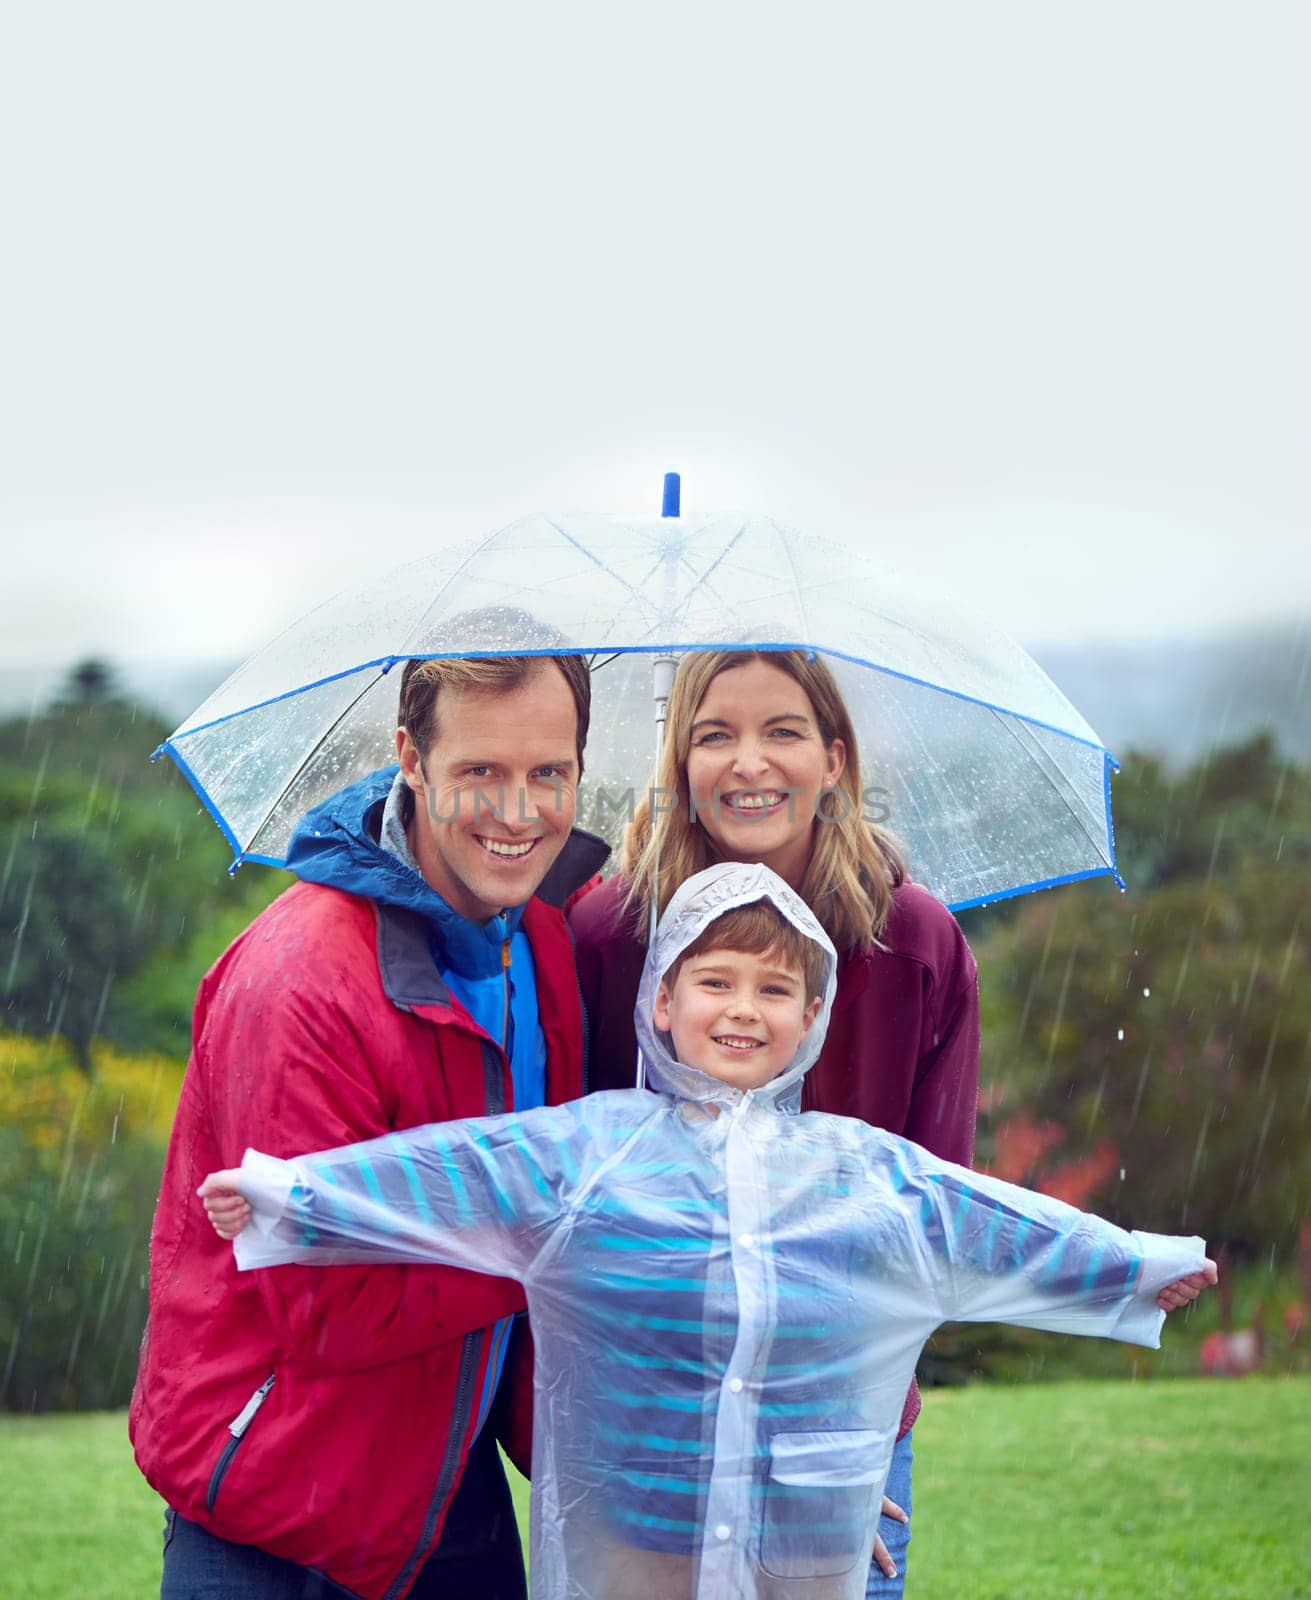 Portrait, family and happy portrait in rain with umbrella outdoor in nature for fun, happiness and quality time. Man, woman and excited child together for water drops, playing and freedom with mockup.